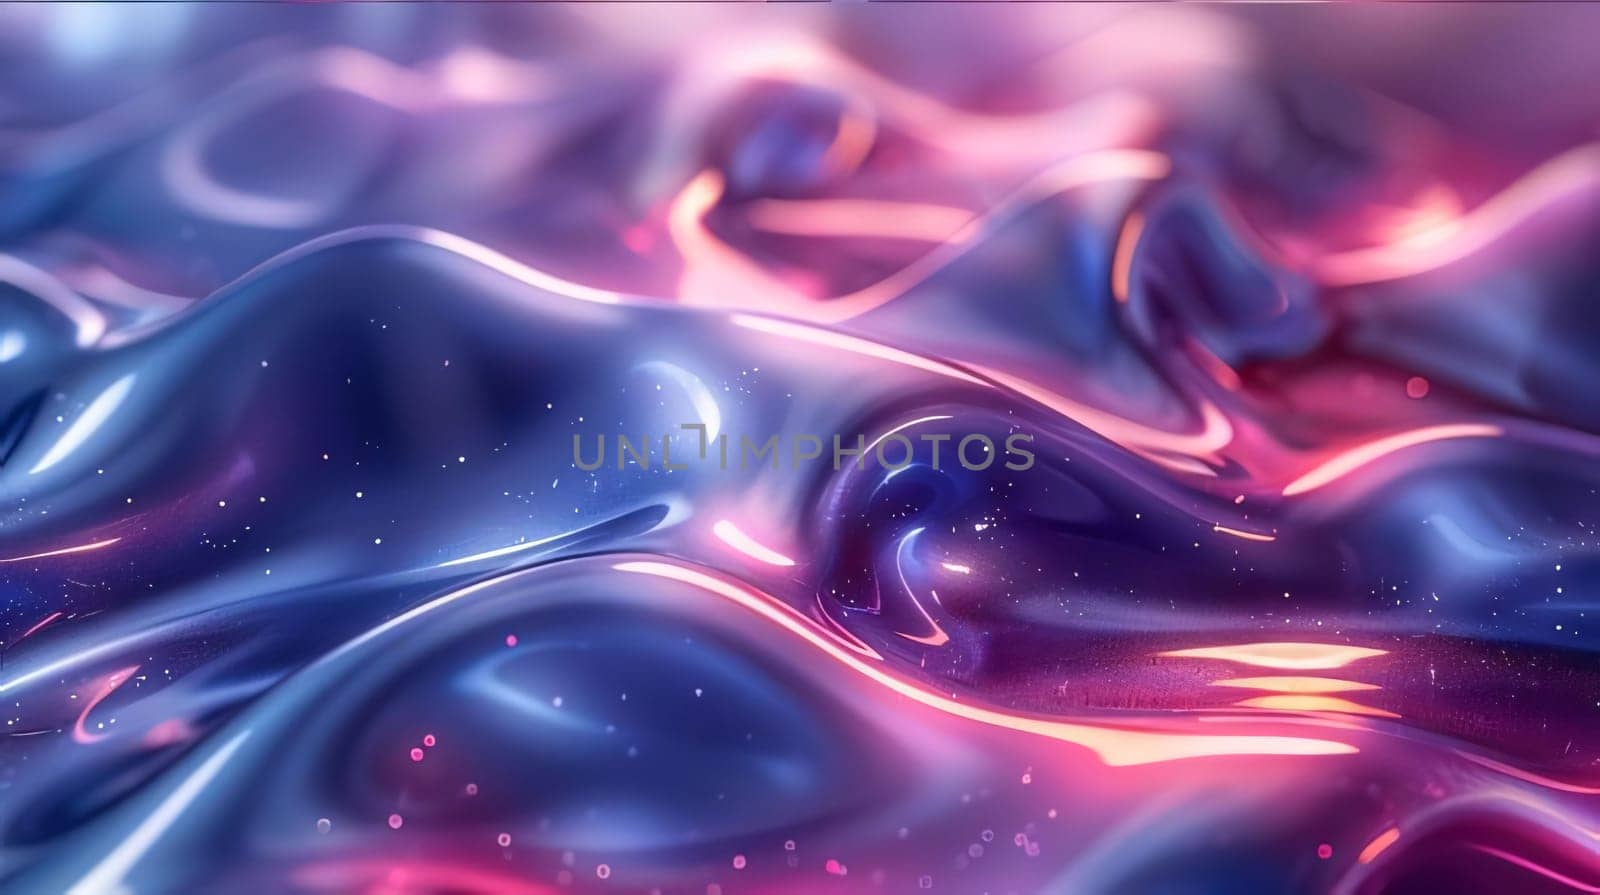 Abstract background design: 3d render, abstract background with blue and pink waves, 3d illustration